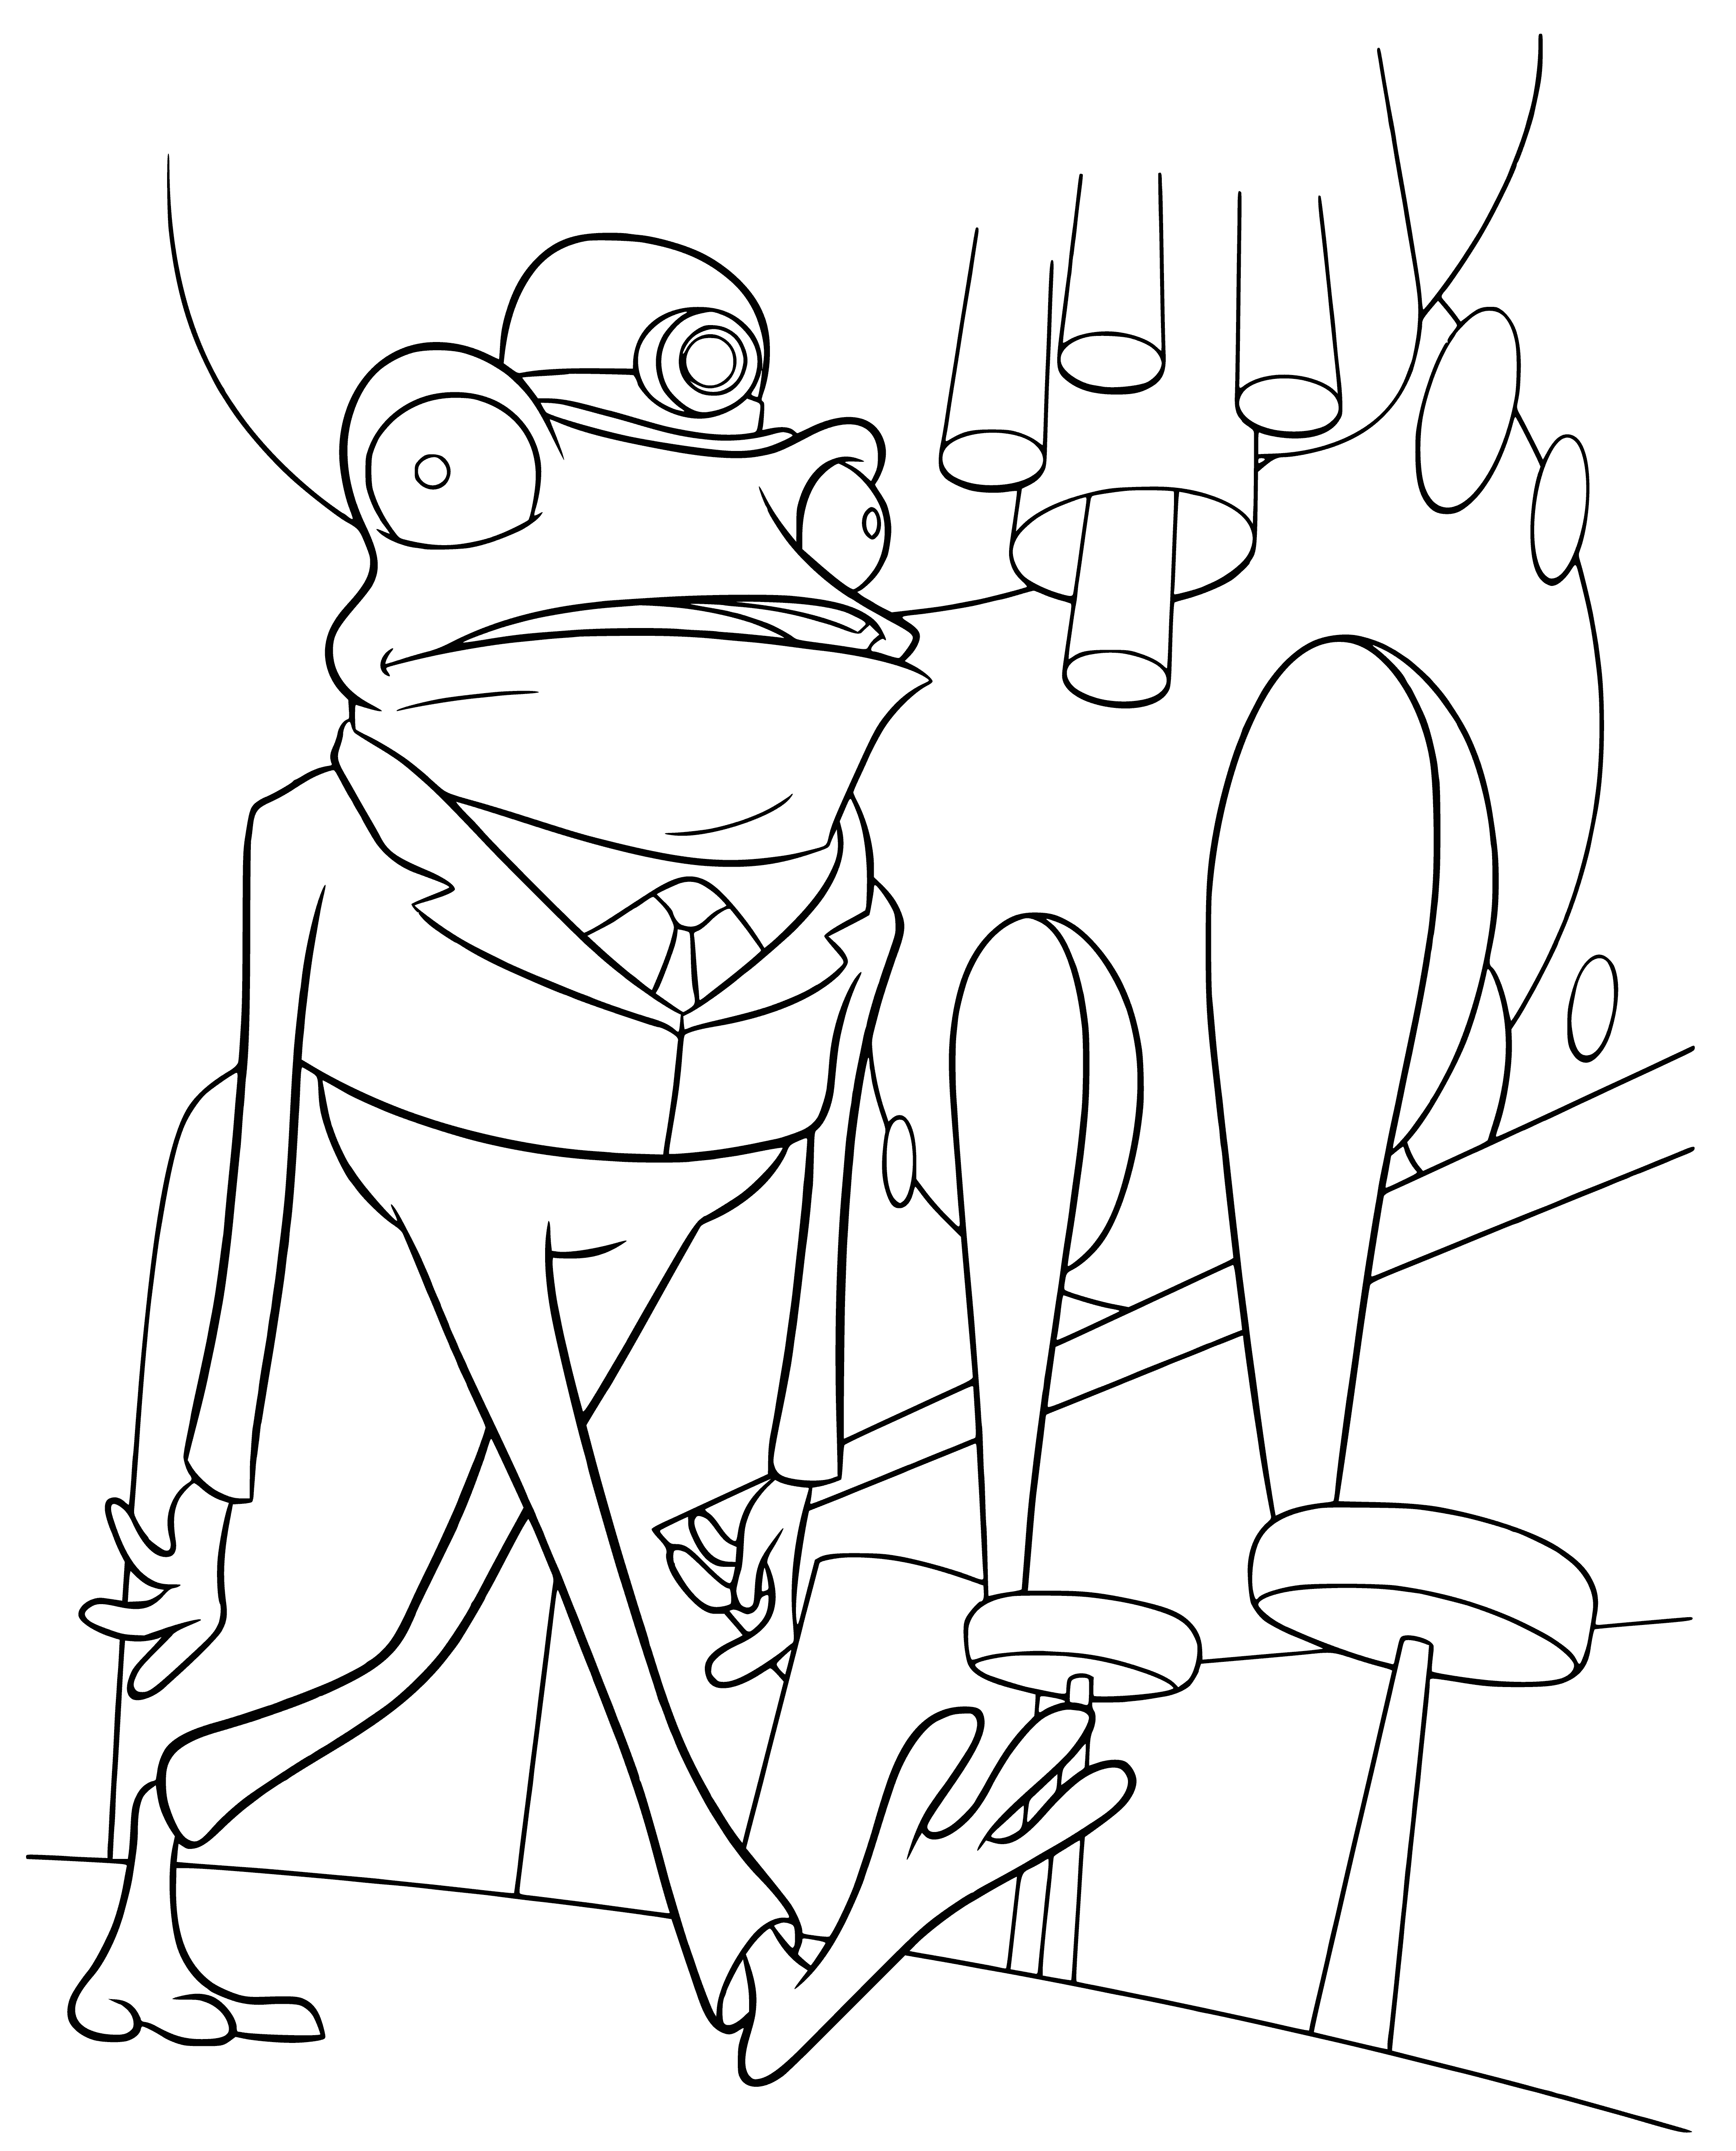 coloring page: Single green zombie frog on a white page with black eyes, sharp teeth, bumpy skin, and disproportionally large hind legs.